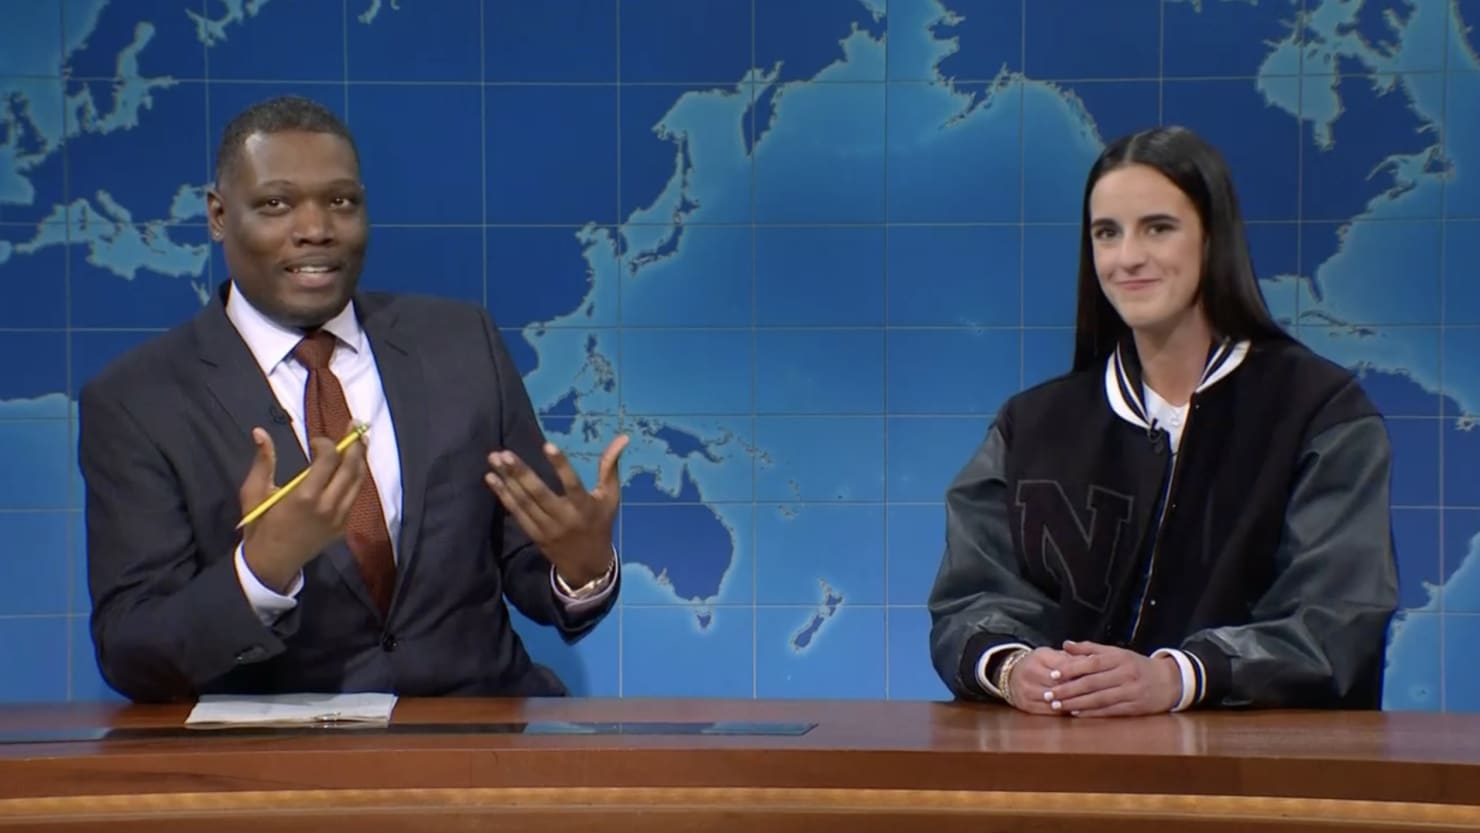 Caitlin Clark Makes Surprise Appearance on ‘SNL’ to Call Out Michael Che for Disparaging Women’s Sports